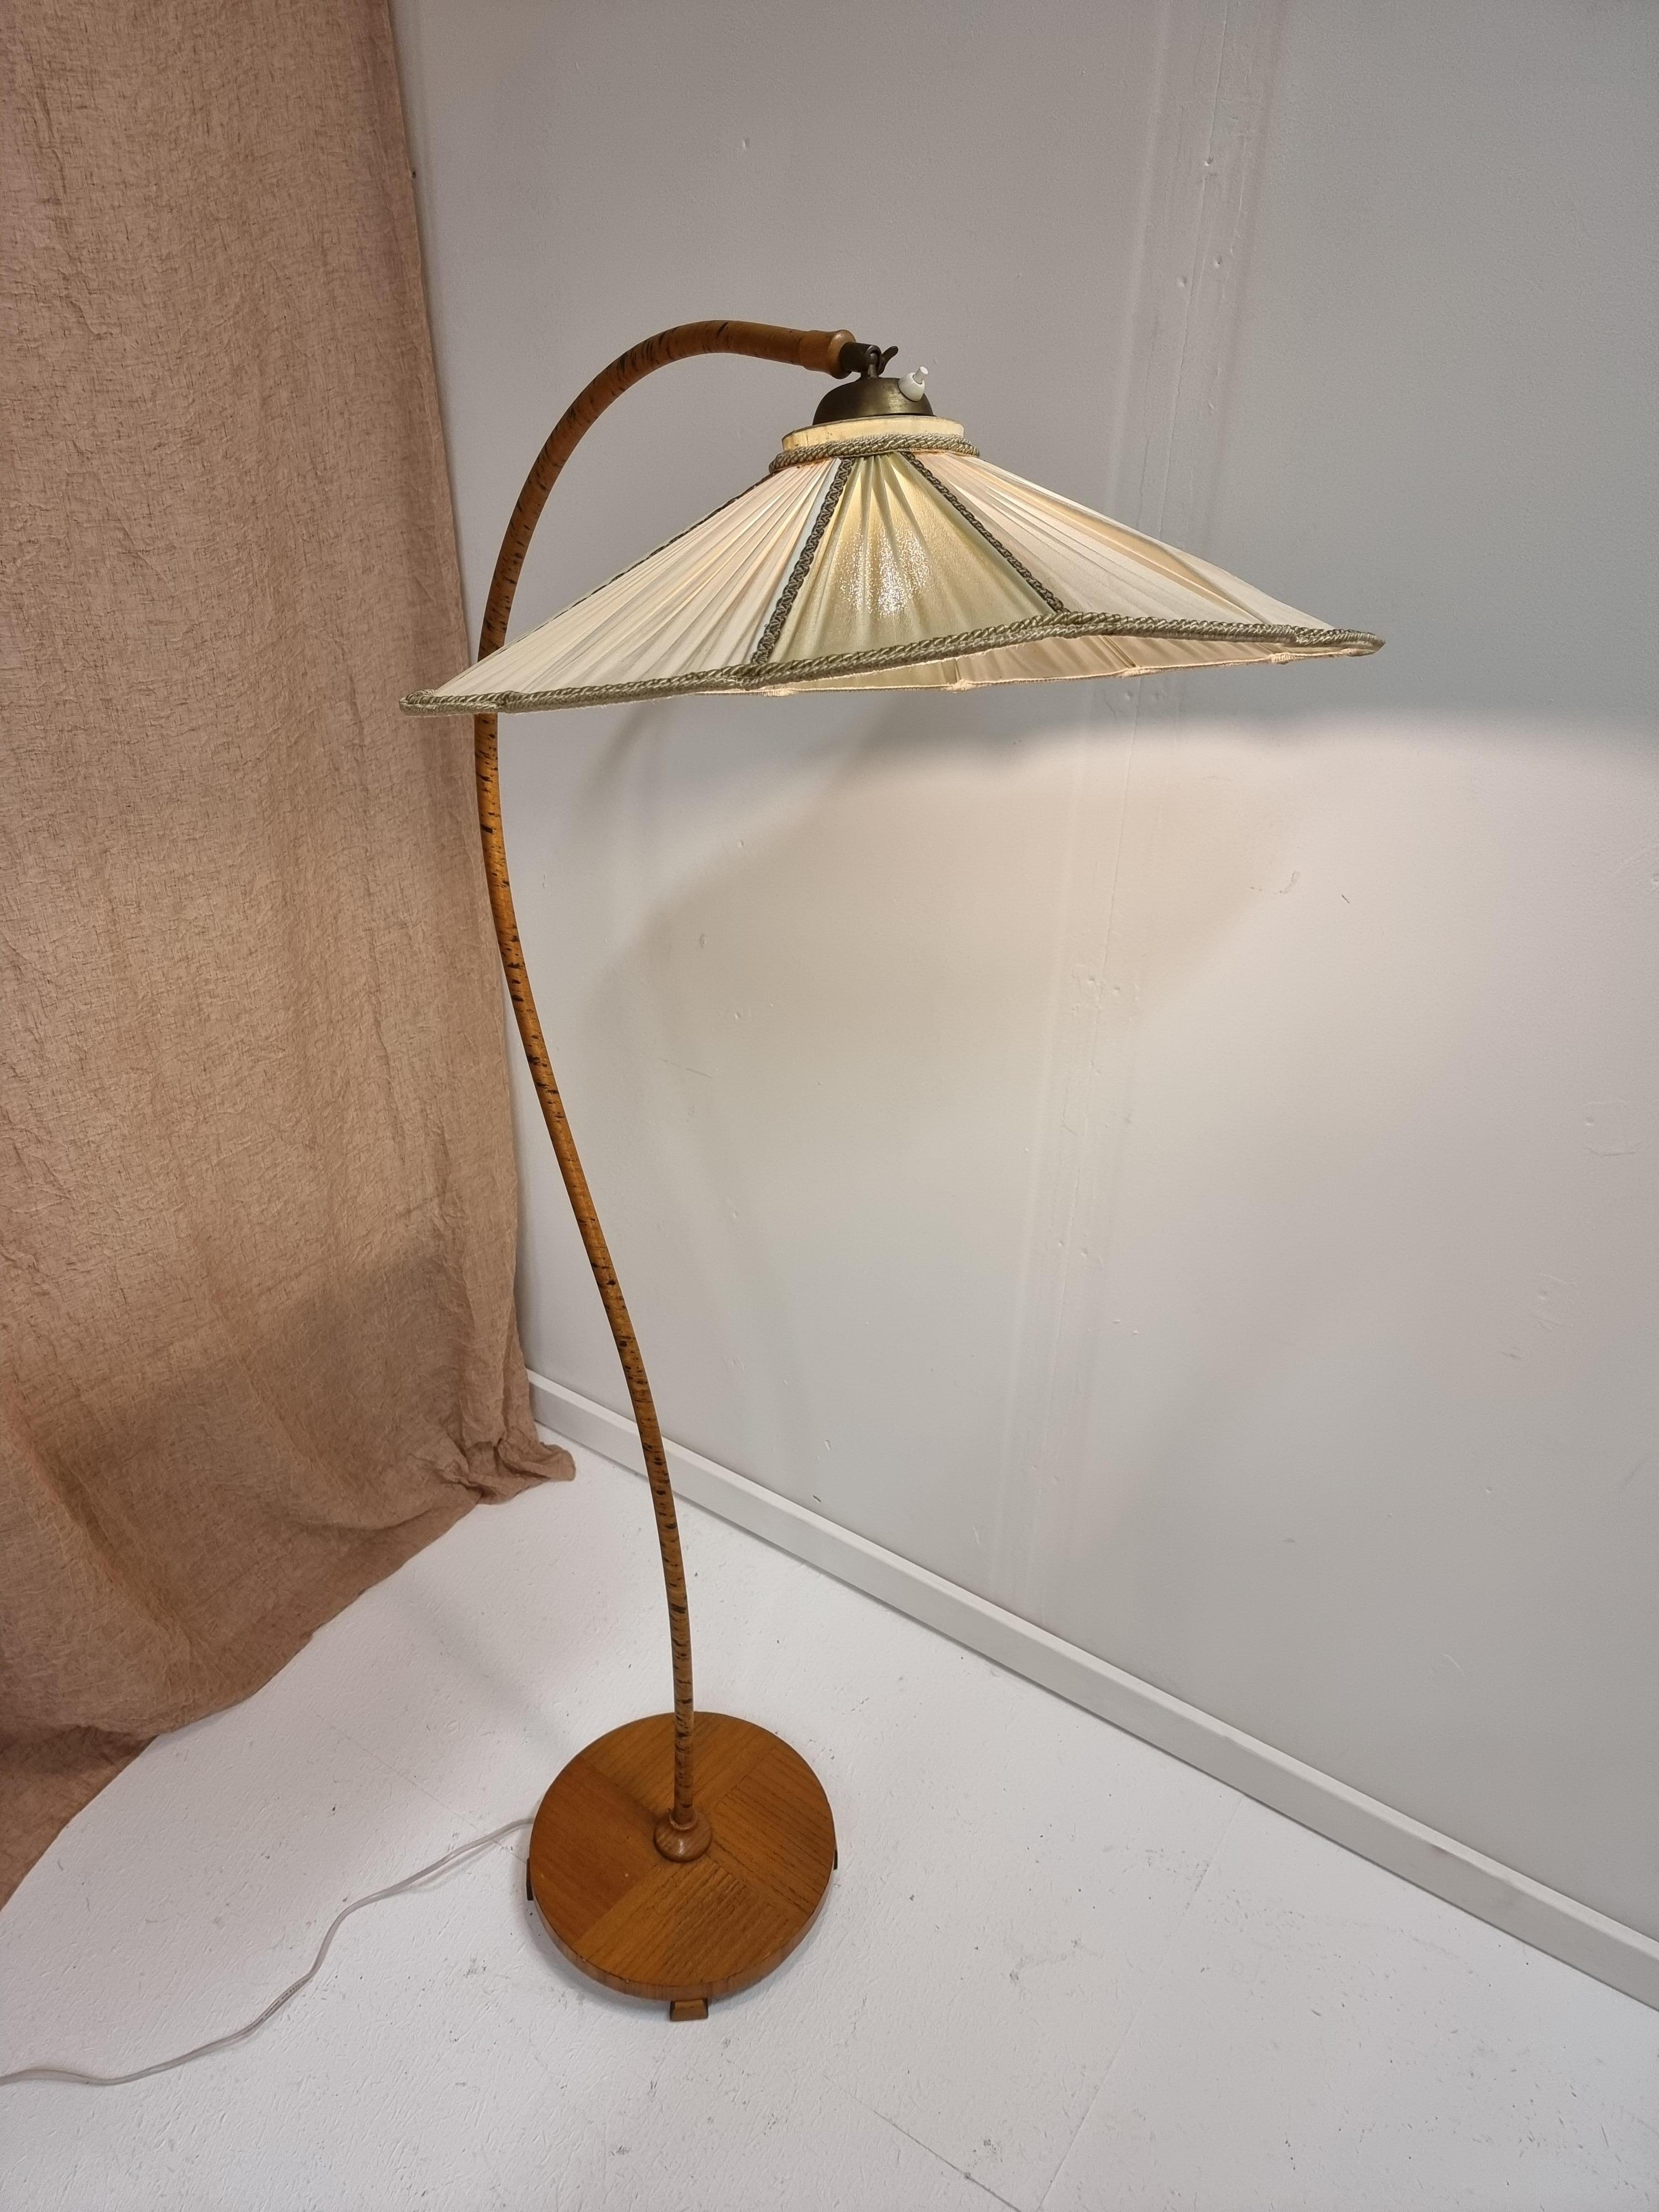 A rare Swedish Art Deco floor lamp with original lamp shade. Wooden S-shaped base. Original label: Aage Eriksson, Midskog. Stamped Made in Sweden.

In beautiful condition, lamp shade fabric with one smaller tear, and some discolorations. Beautiful